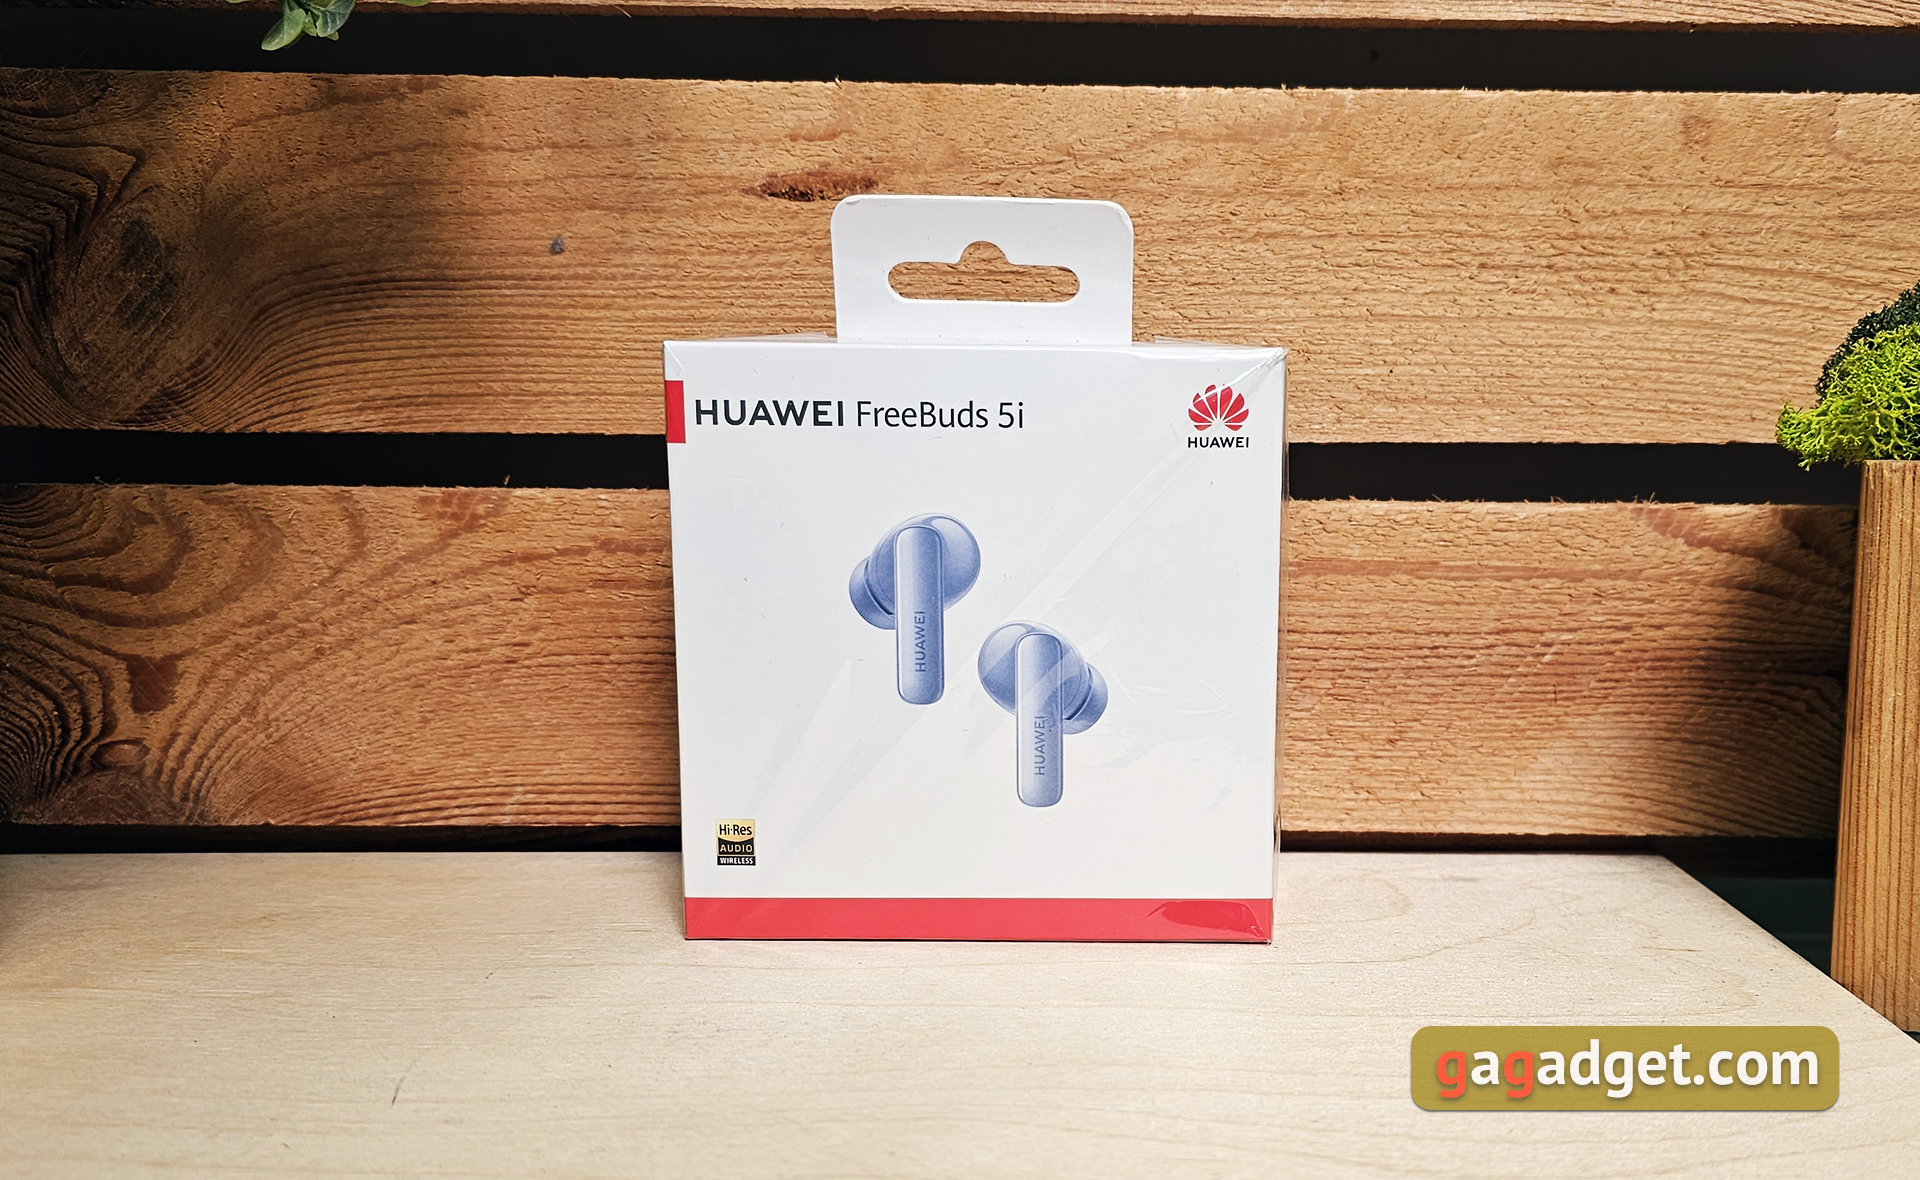 Huawei FreeBuds 5i review: in-ear TWS headphones with active noise